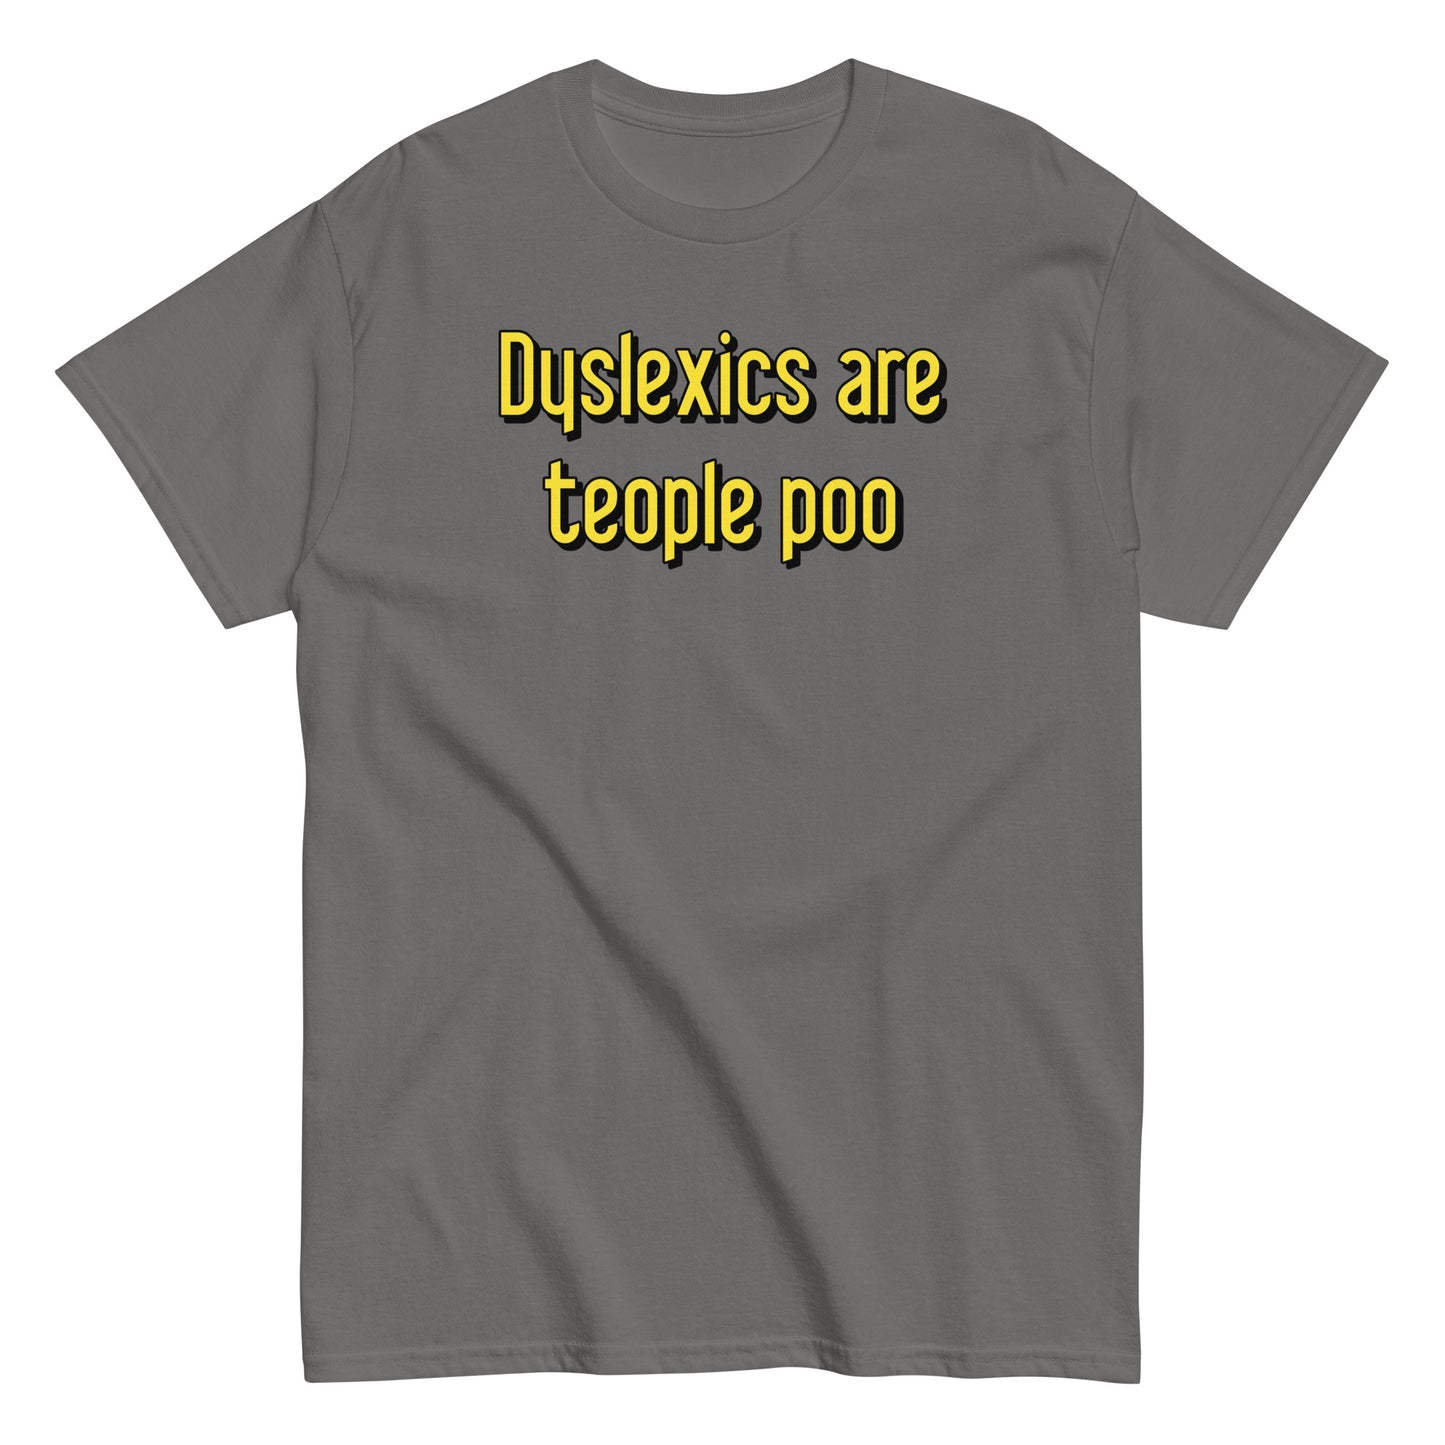 Dyslexics are teople poo Men's Classic Tee